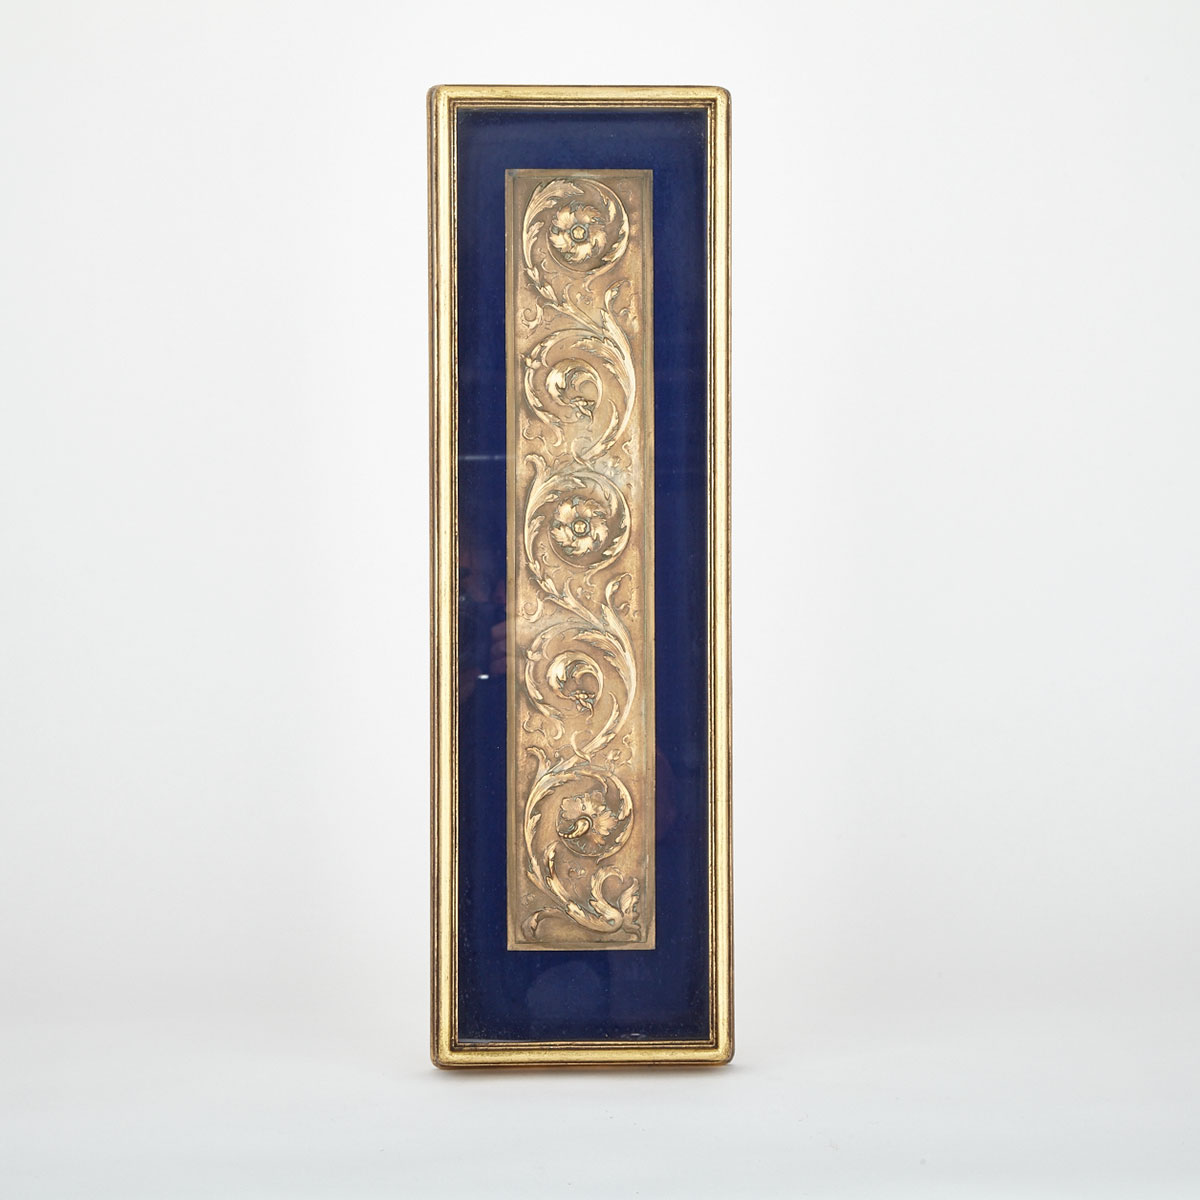 Neoclassical Bronze Relief Architectural Panel, 19th/early 20th century